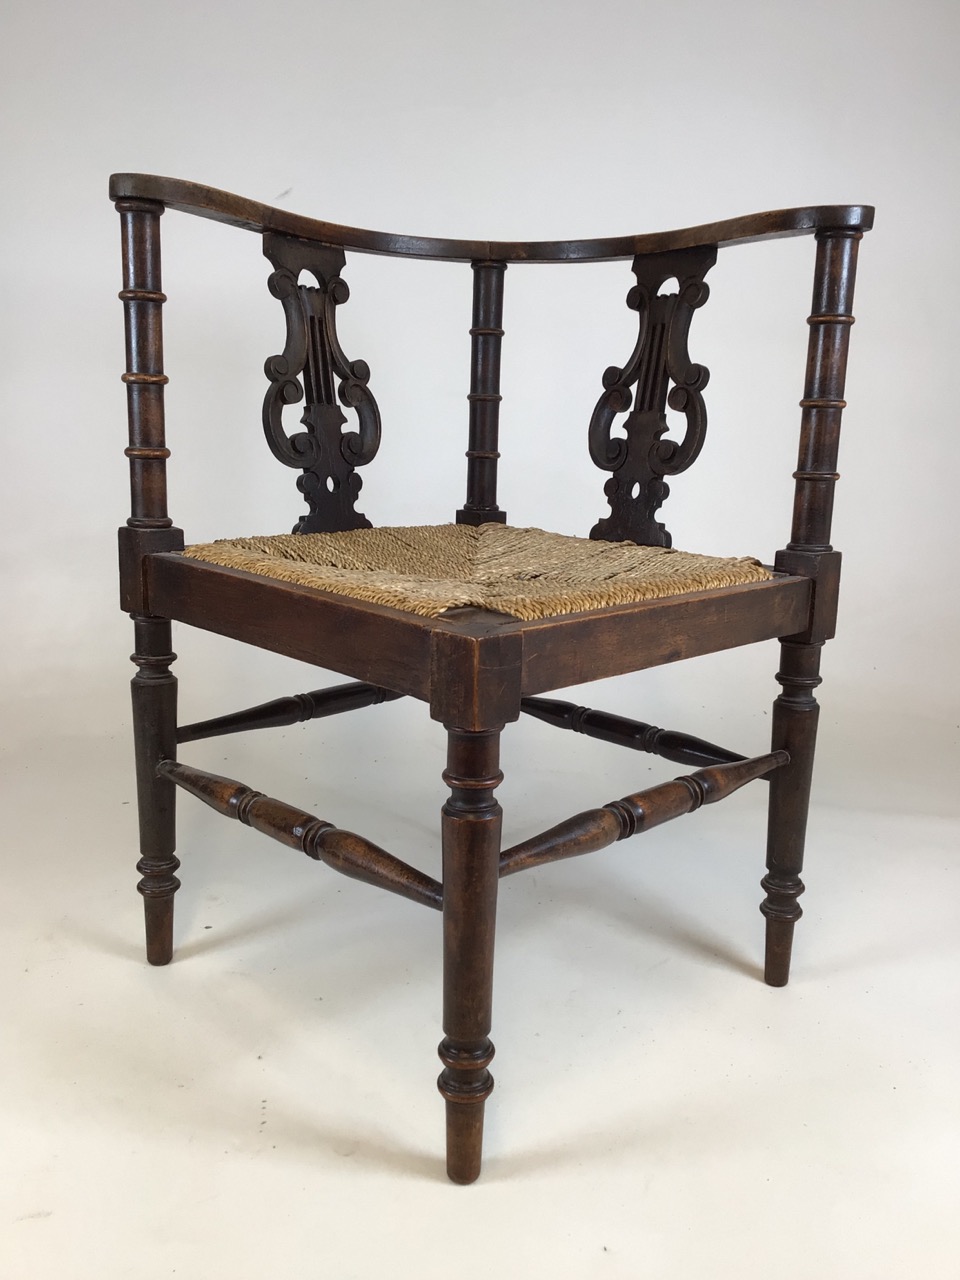 A 19th century rattan seated corner chair with curved back and lyre supports. W:61cm x D:61cm x H: